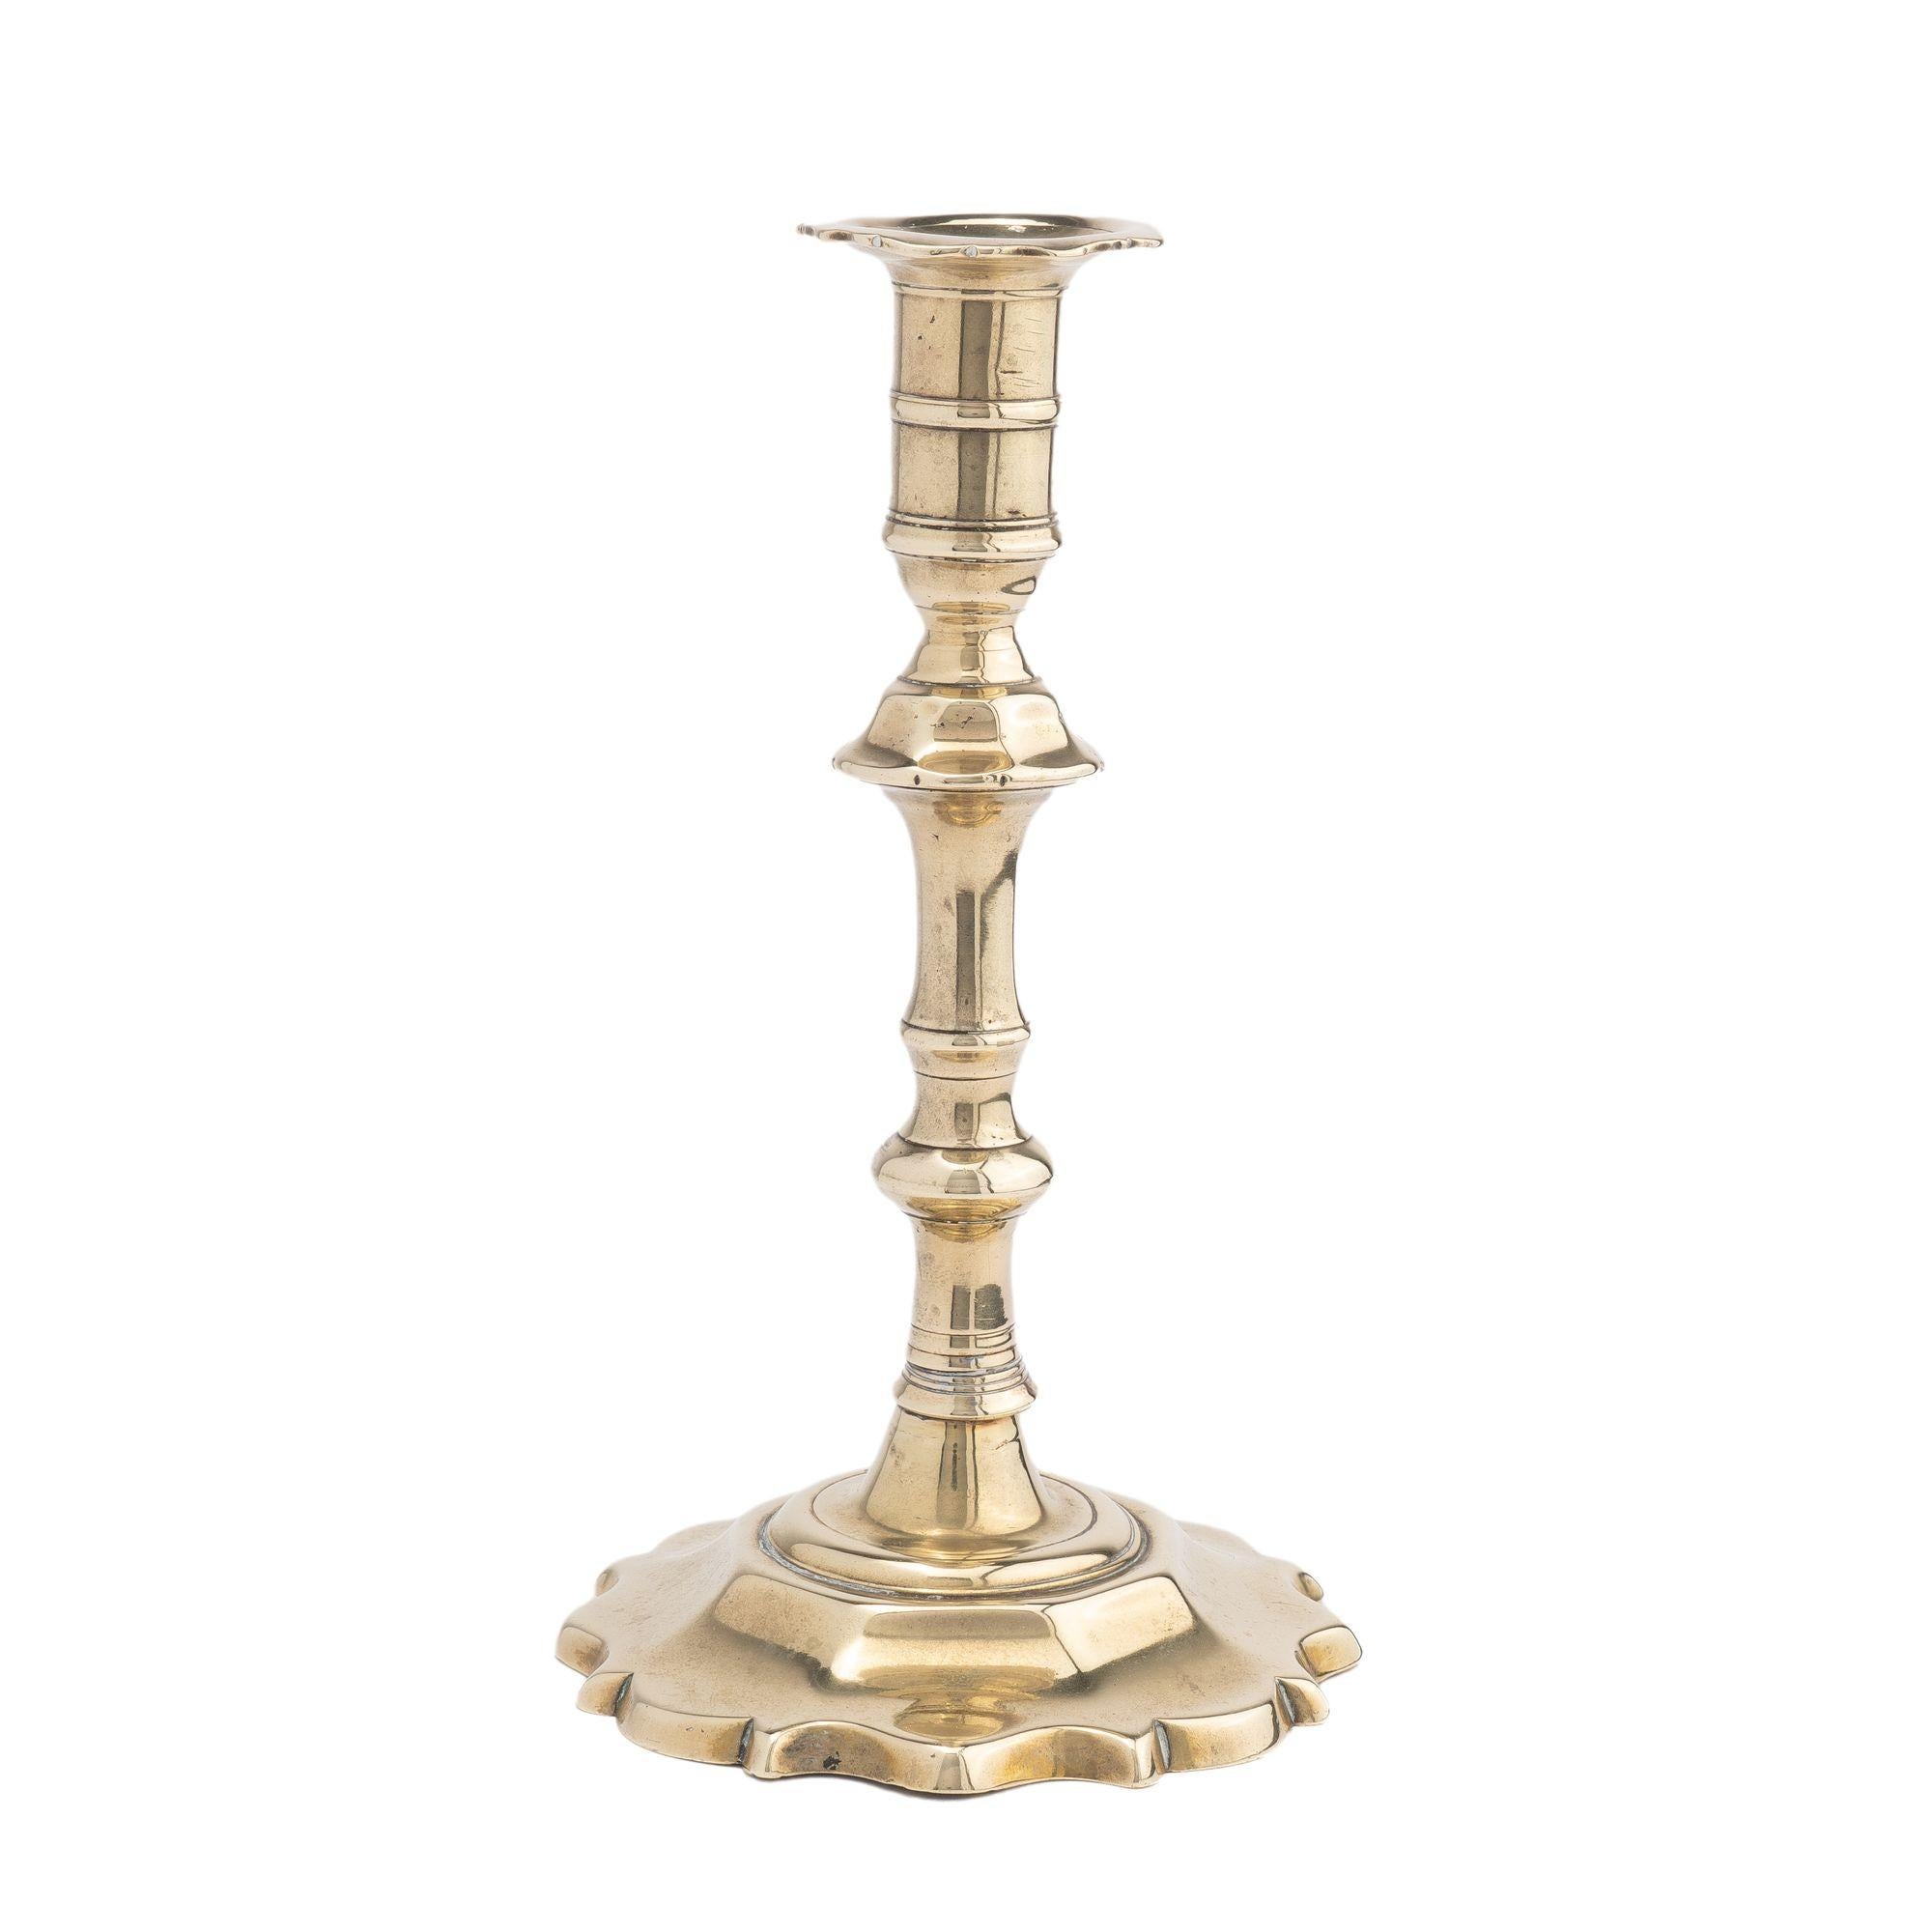 Queen Anne hollow core cast brass candlestick with scalloped edge bobeche and a faceted shaft knob peened to a scalloped edge domed base. A square groove on the interior of the candle cup indicated that is once had an internal screw candle ejector